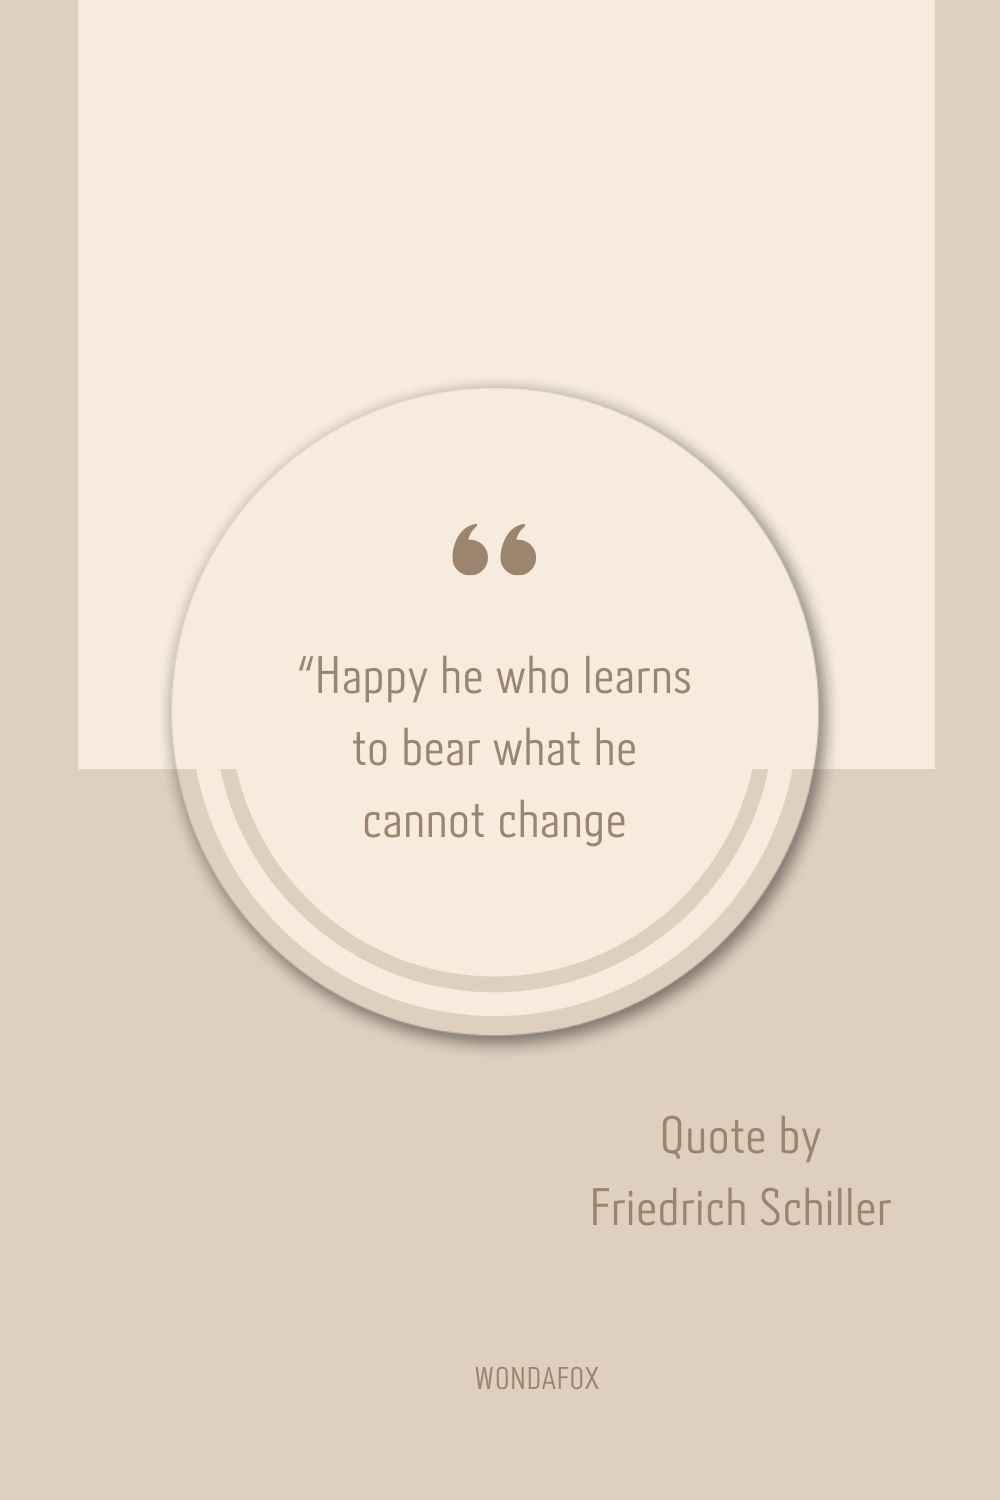 “Happy he who learns to bear what he cannot change.
Friedrich Schiller